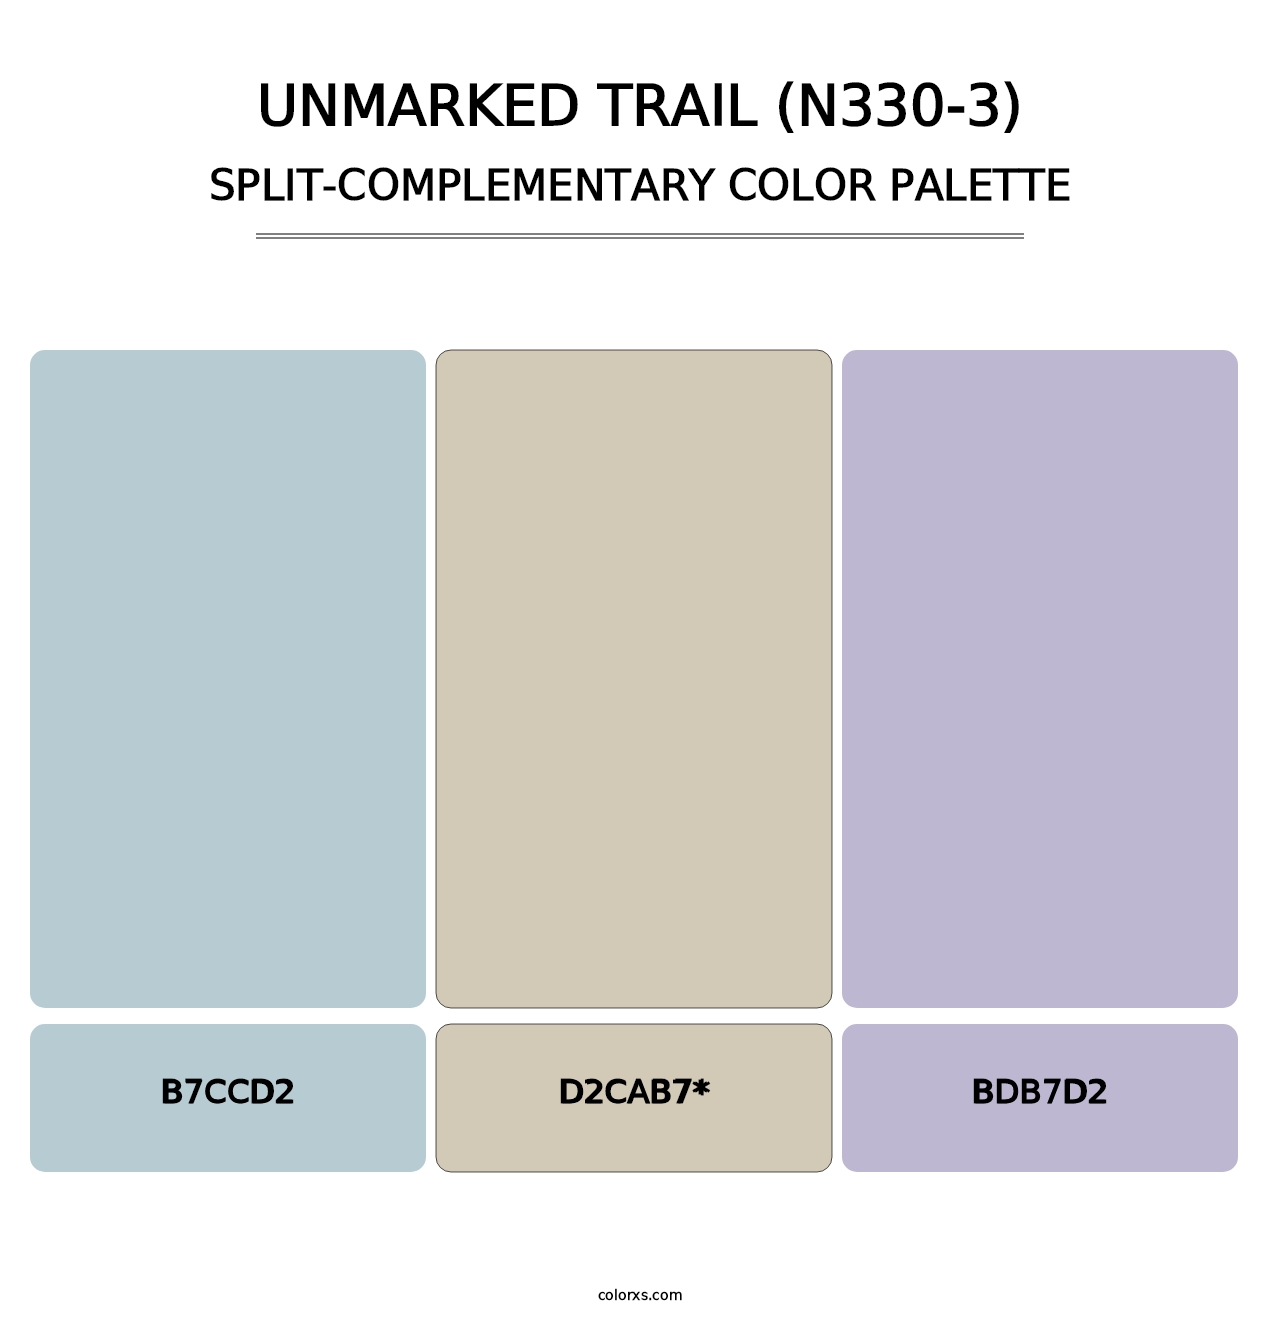 Unmarked Trail (N330-3) - Split-Complementary Color Palette